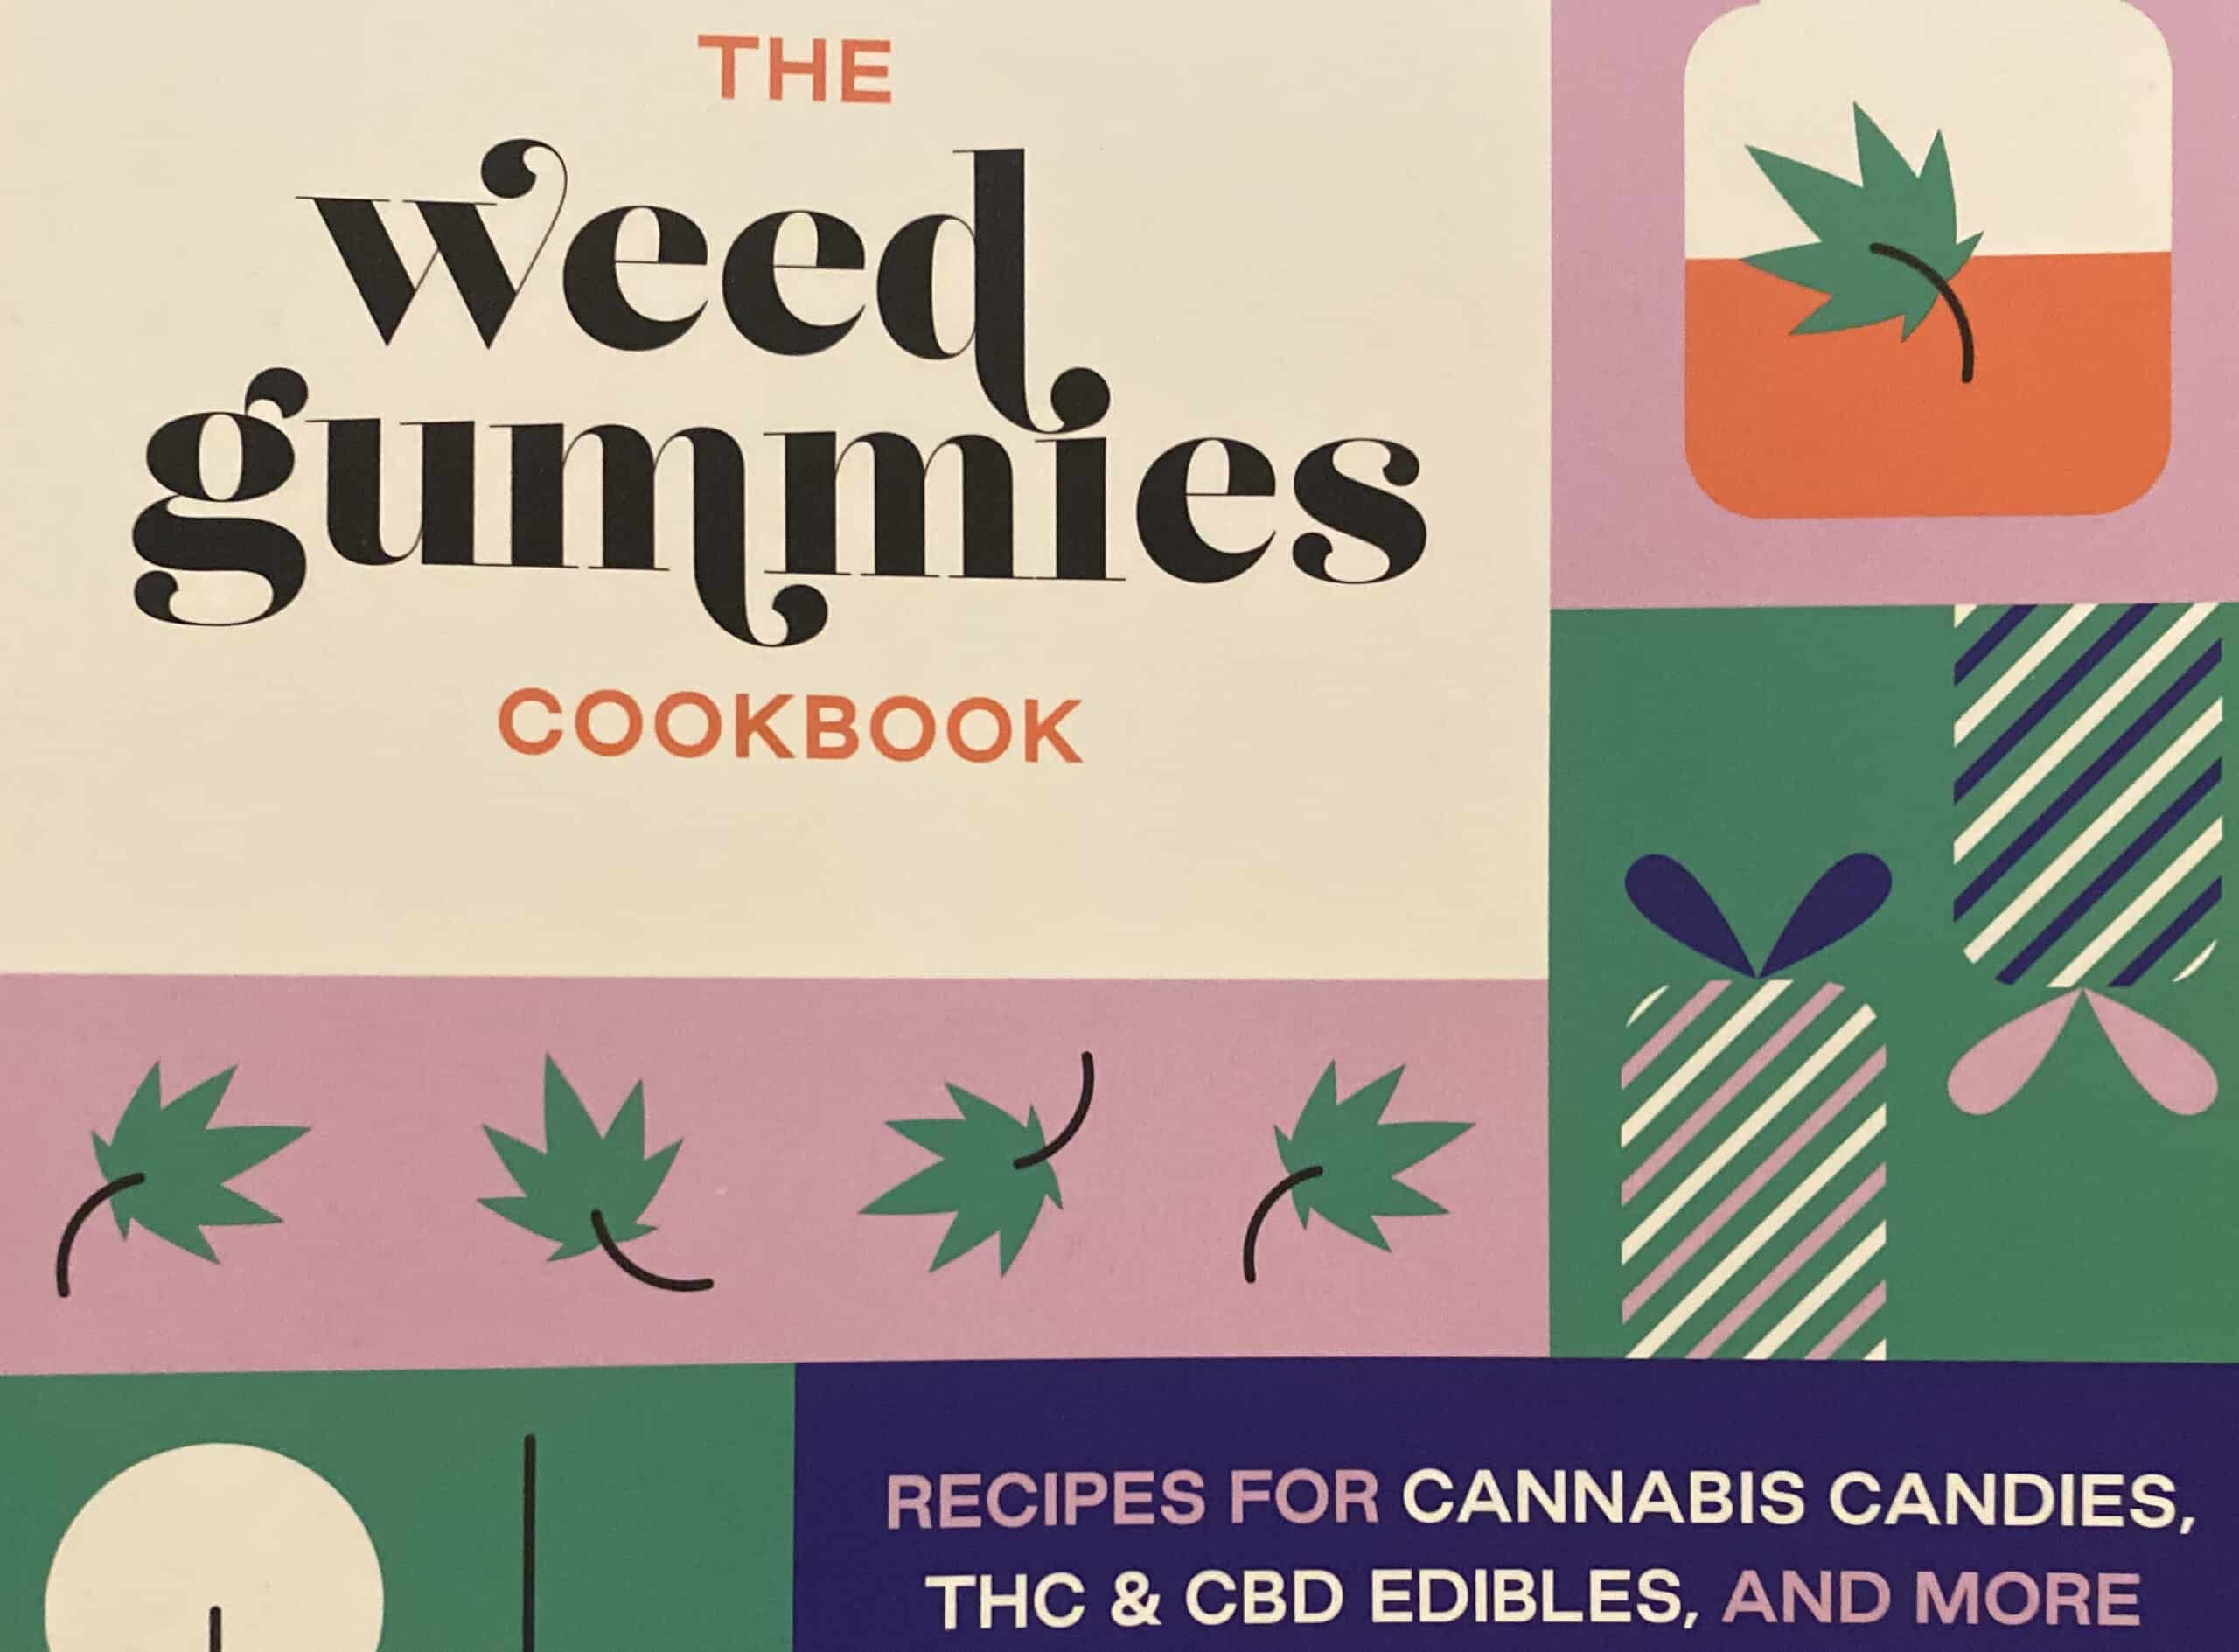 The Weed Gummies Cookbook: Recipes to Make Legal Edibles at Home